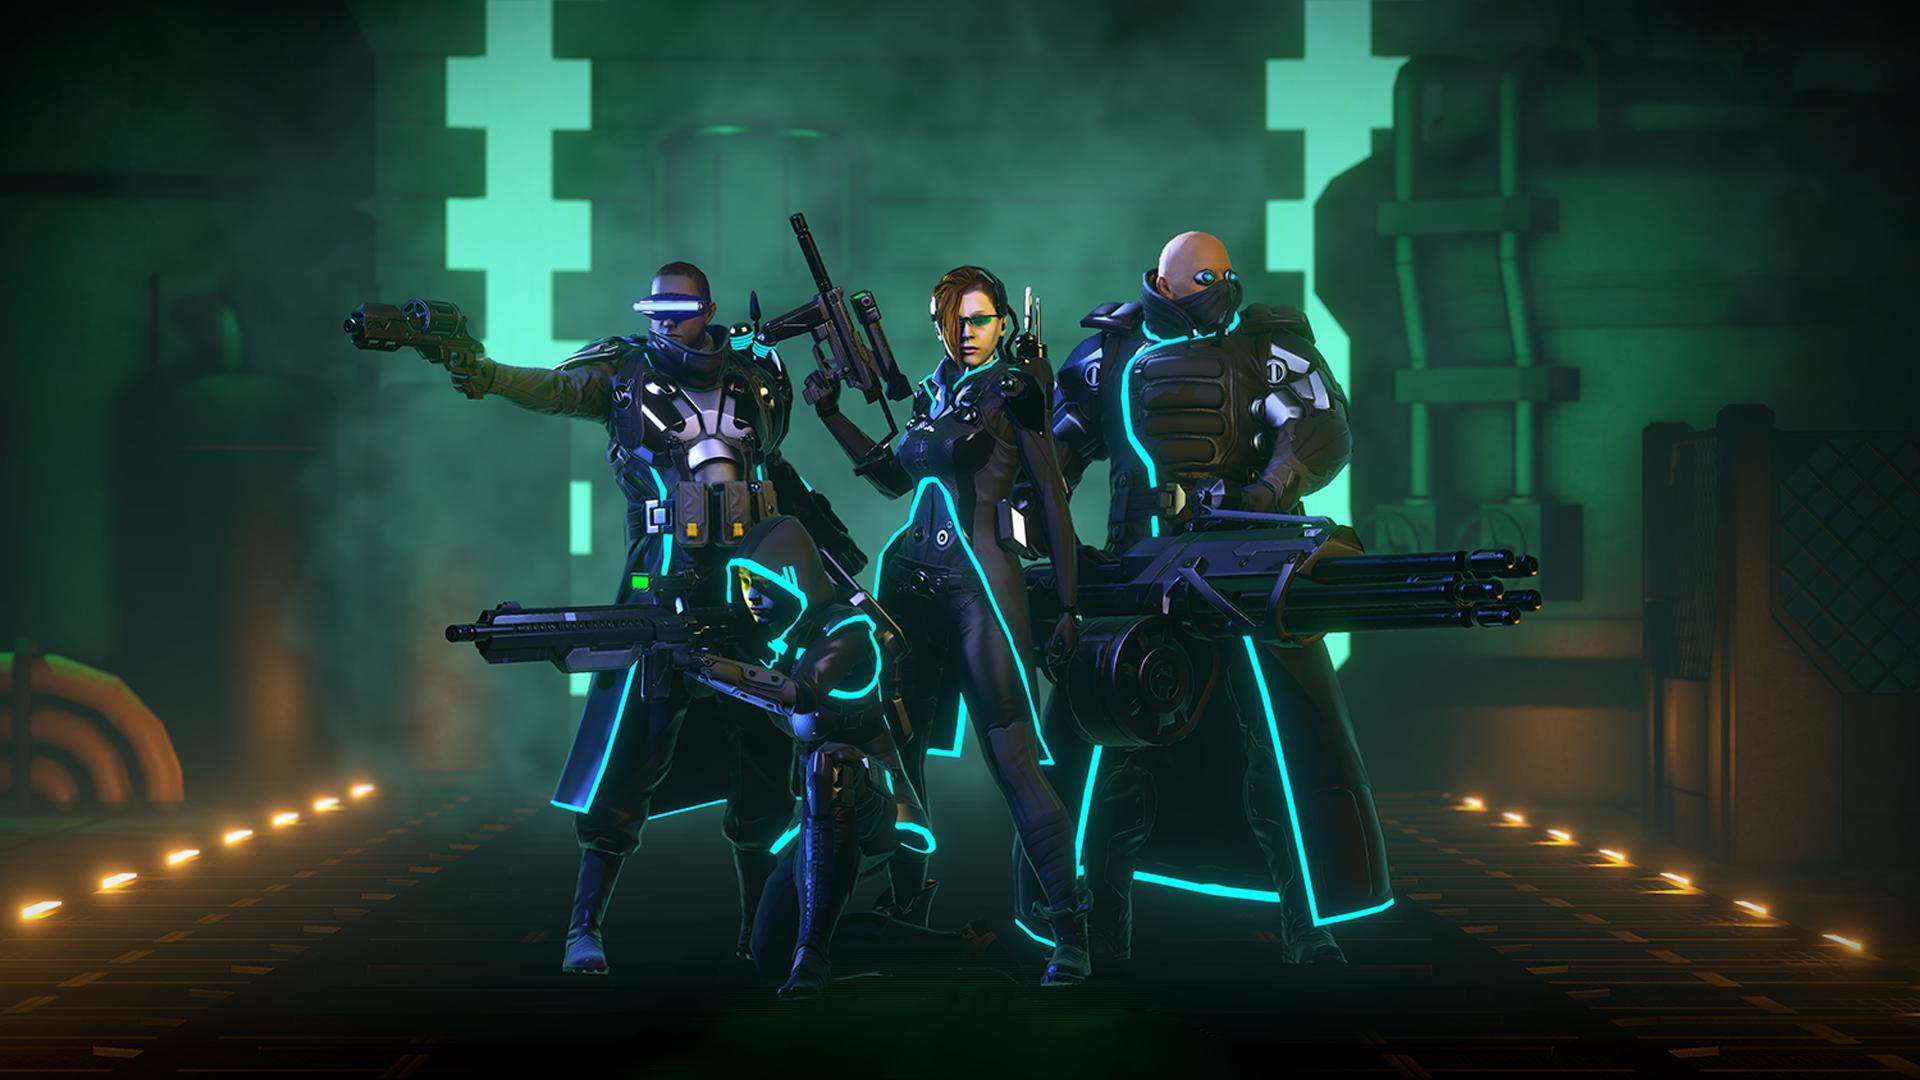 Satellite Reign (PC) patched with 4-player co-op